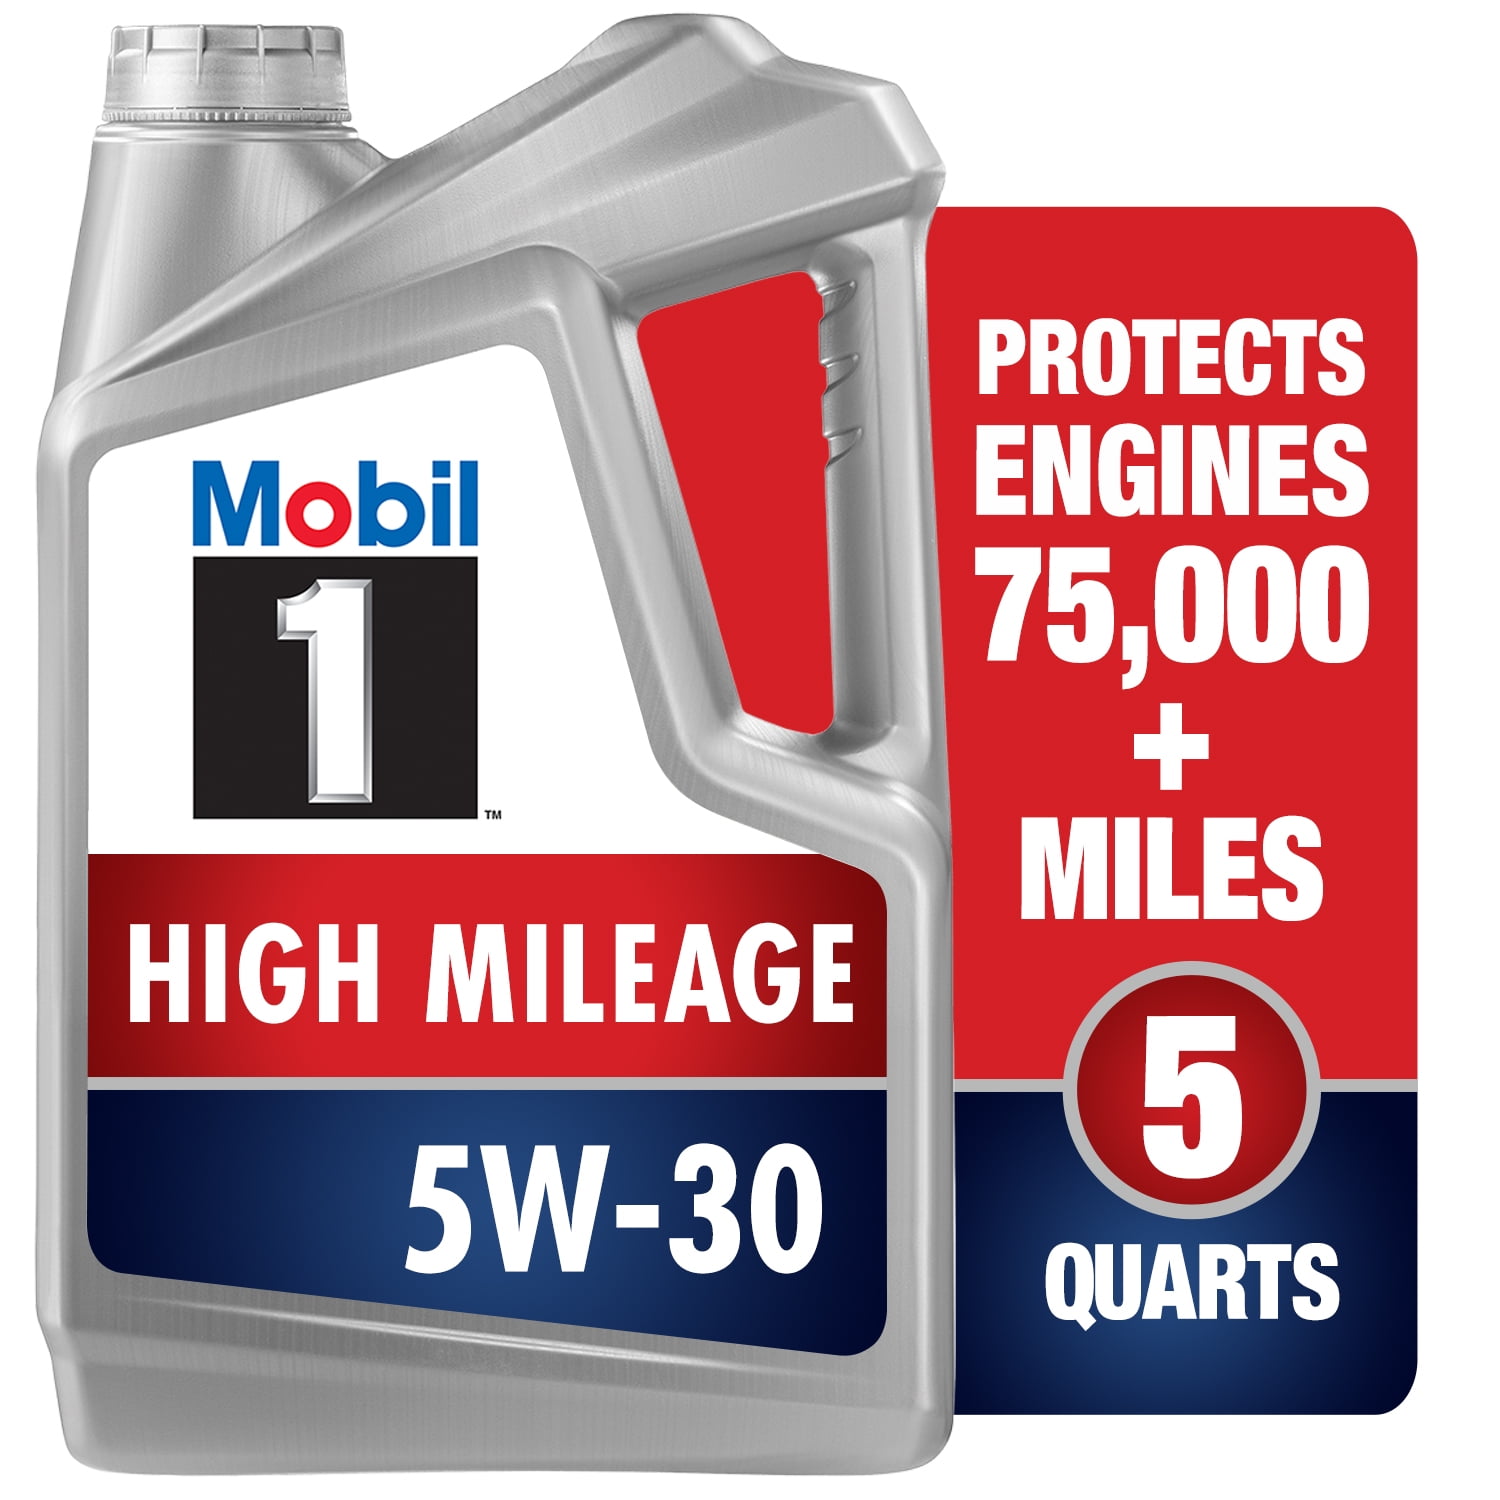 Mobil 1 High Mileage Full Synthetic Motor Oil 5W-30, 5 qt